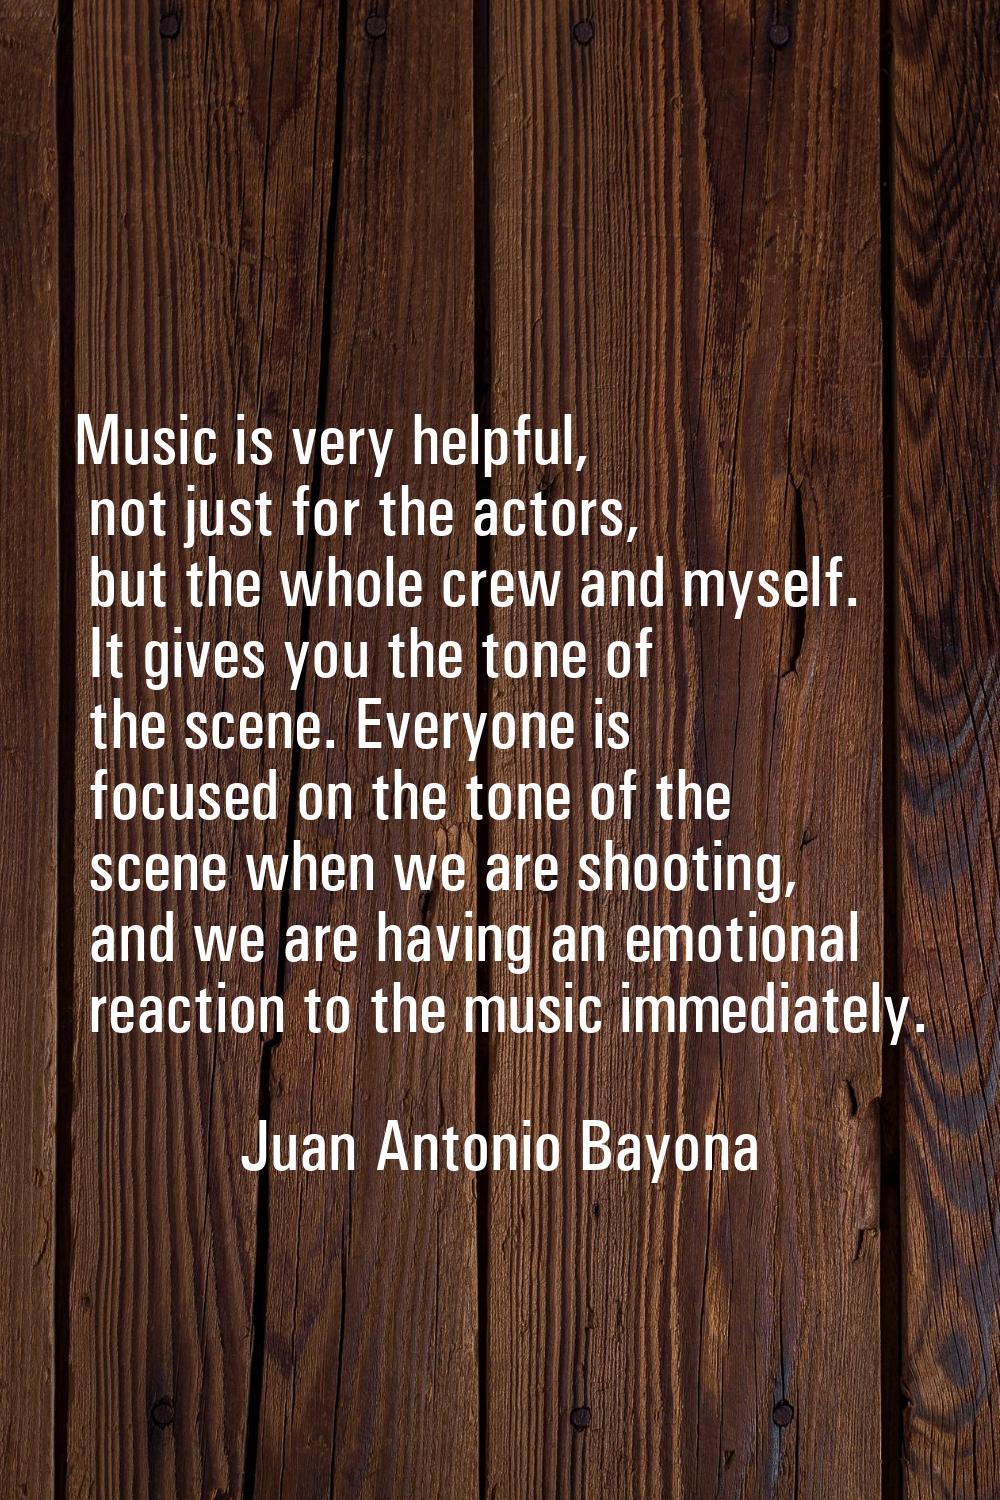 Music is very helpful, not just for the actors, but the whole crew and myself. It gives you the ton